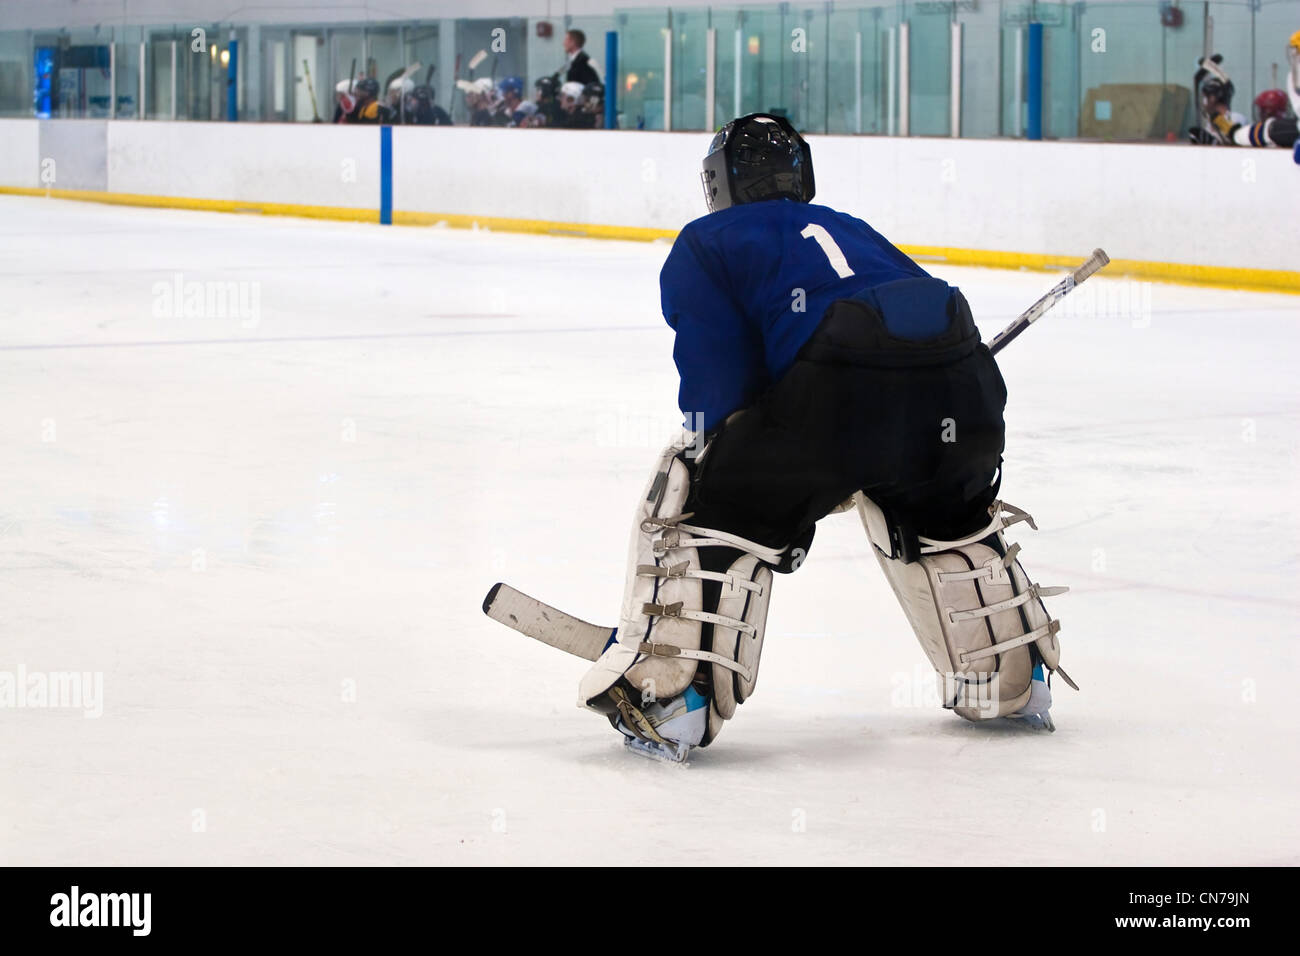 A hockey goalie awaiting the return of the puck so he can resume his defensive role. Shallow depth of field. Stock Photo